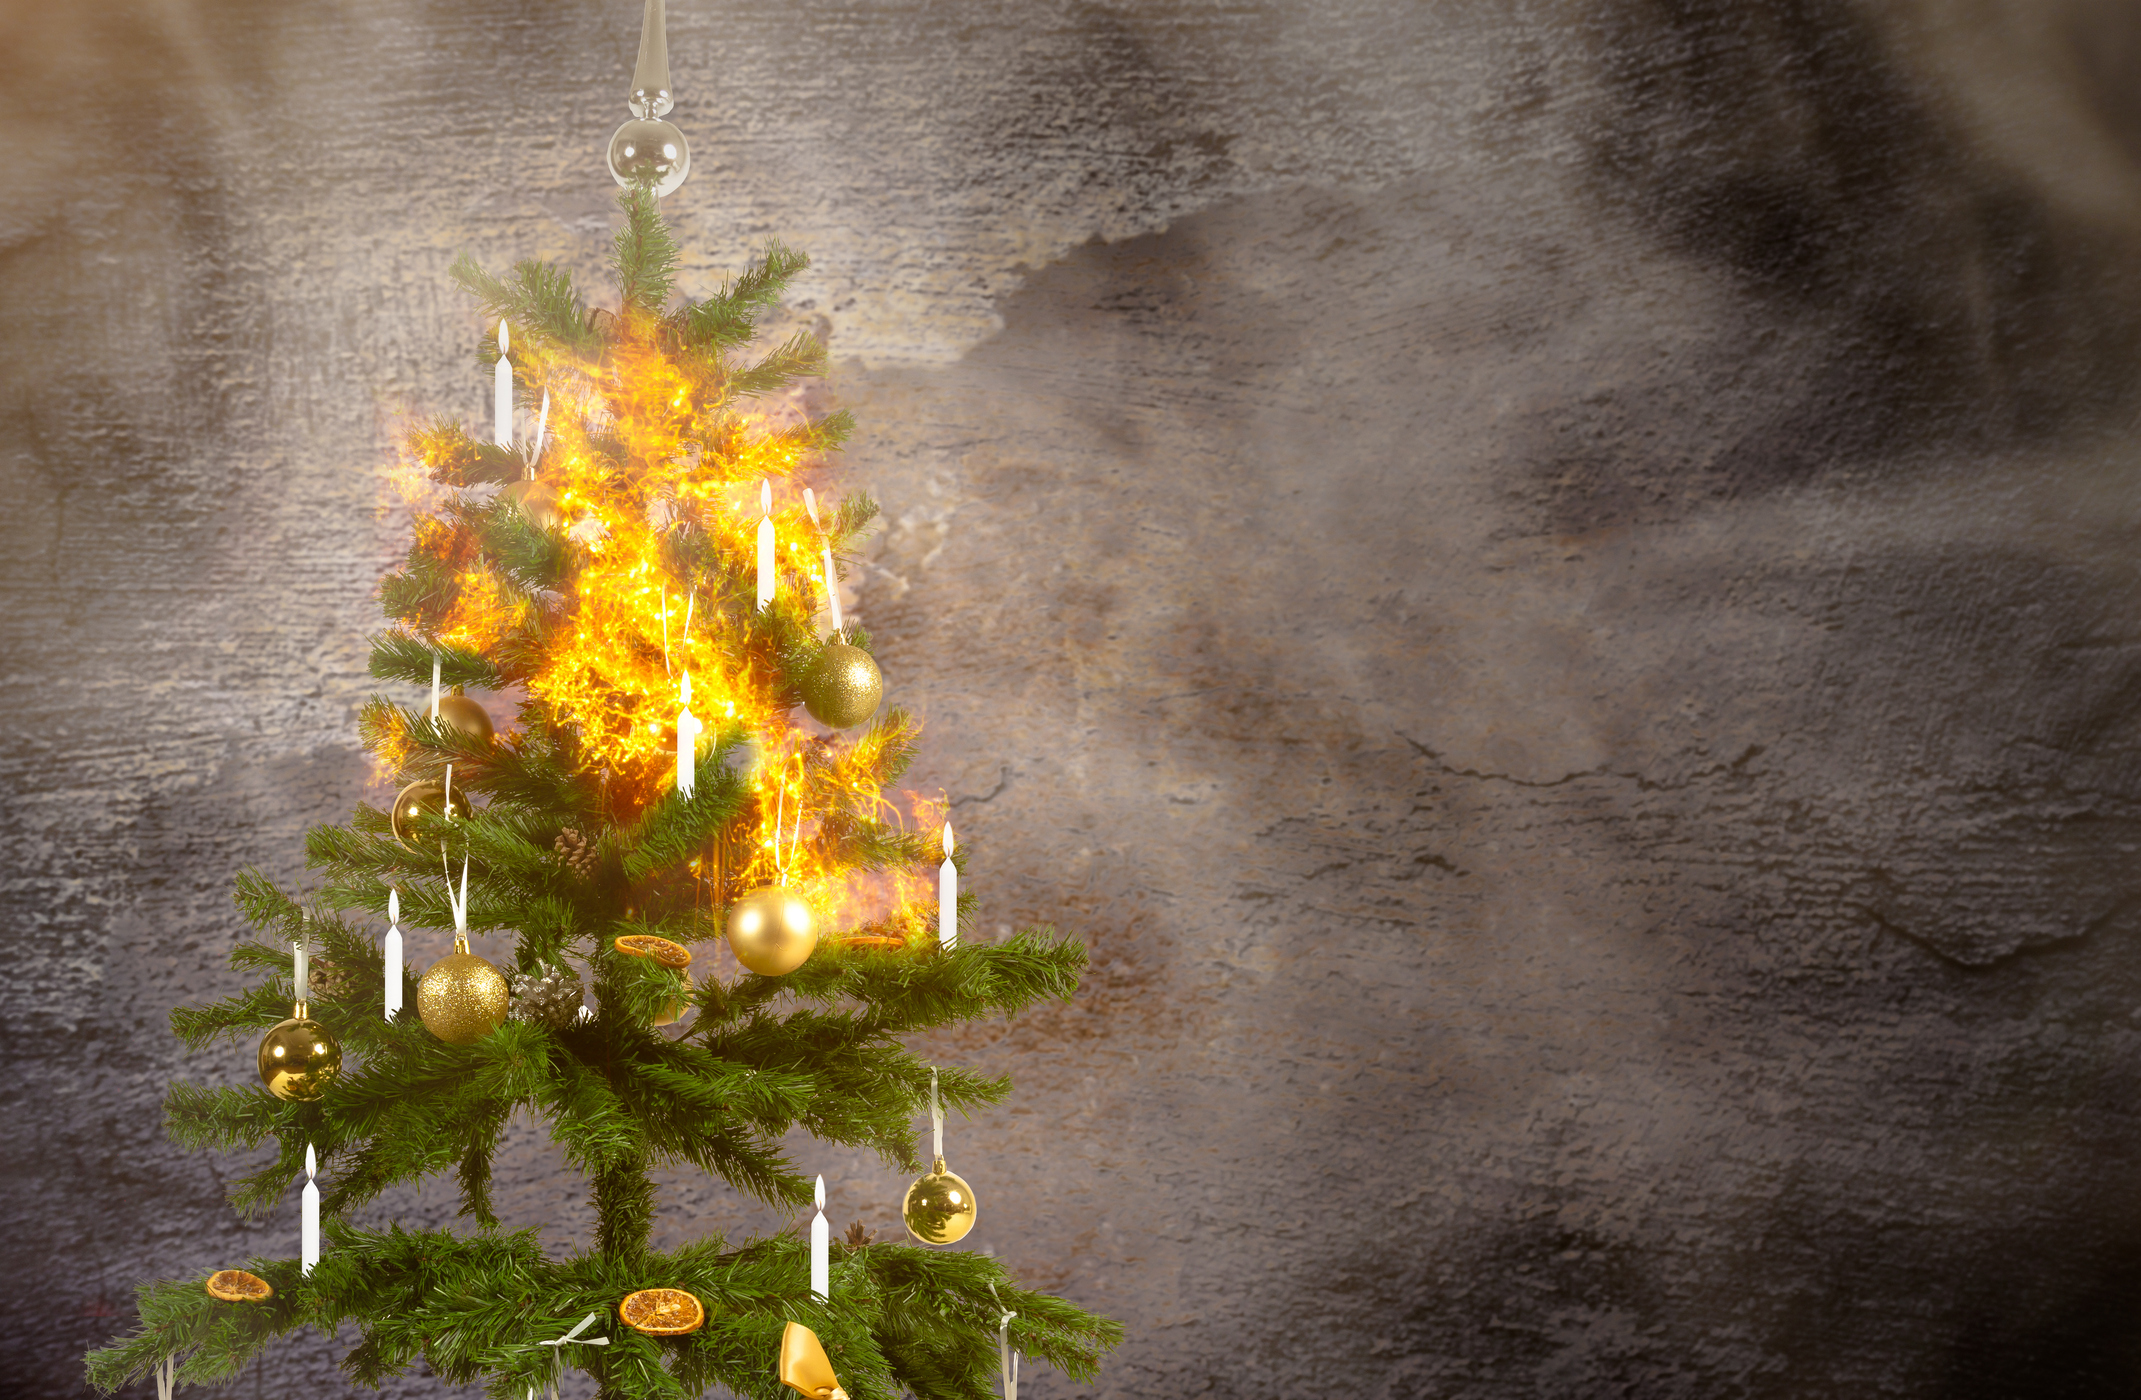 Fire Damage Restoration and Tips on Fire Prevention During the Holidays